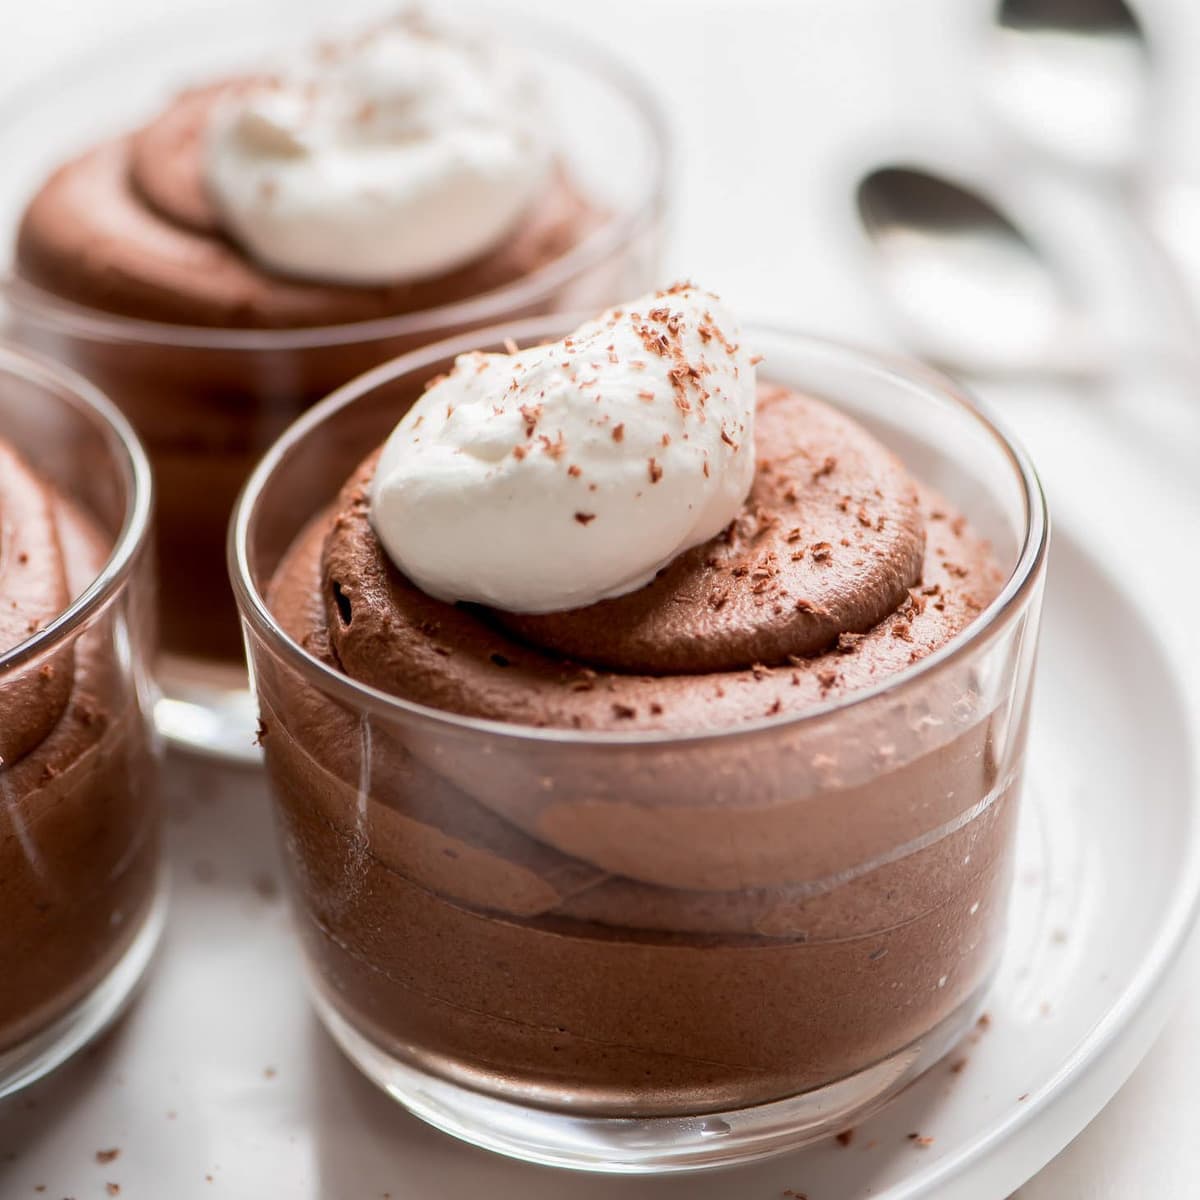 Christmas desserts - glass of chocolate mousse topped with whipped cream.